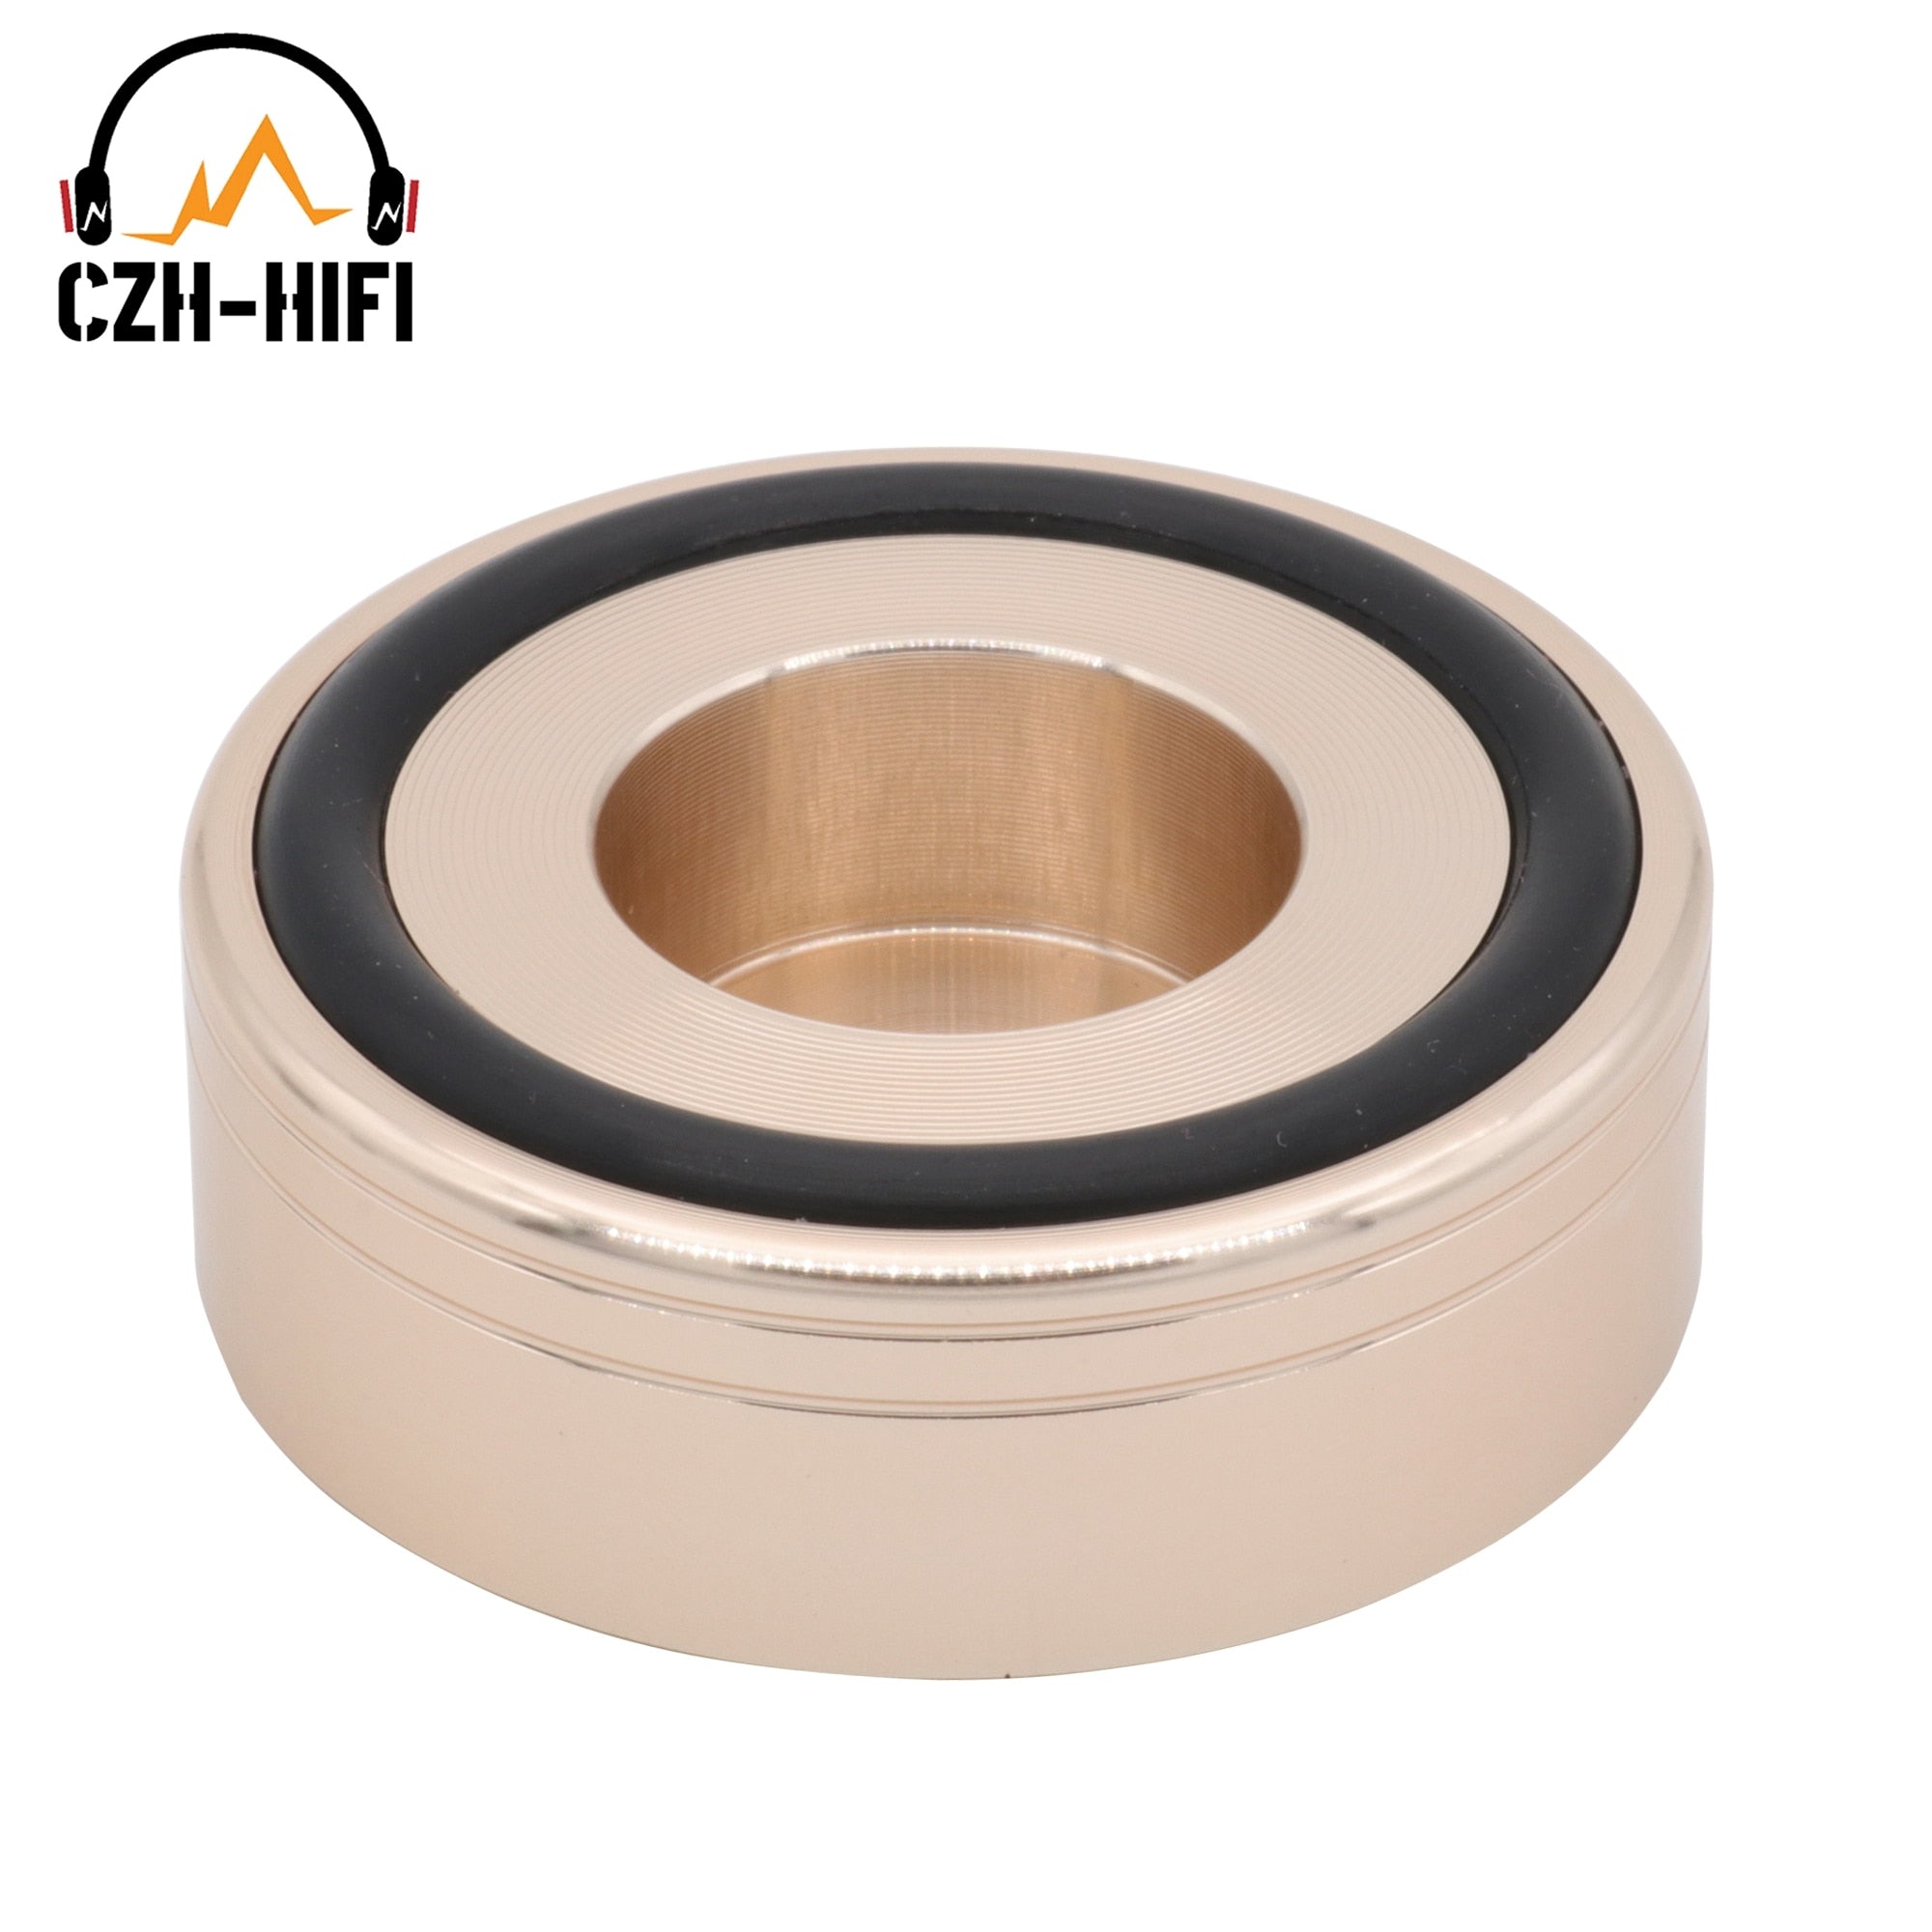 44x17mm Audio Isolation Feet CNC Machined Solid Aluminum Stand Base Mat Pad for CD Player Speaker Amplifier DAC Radio Subwoofer